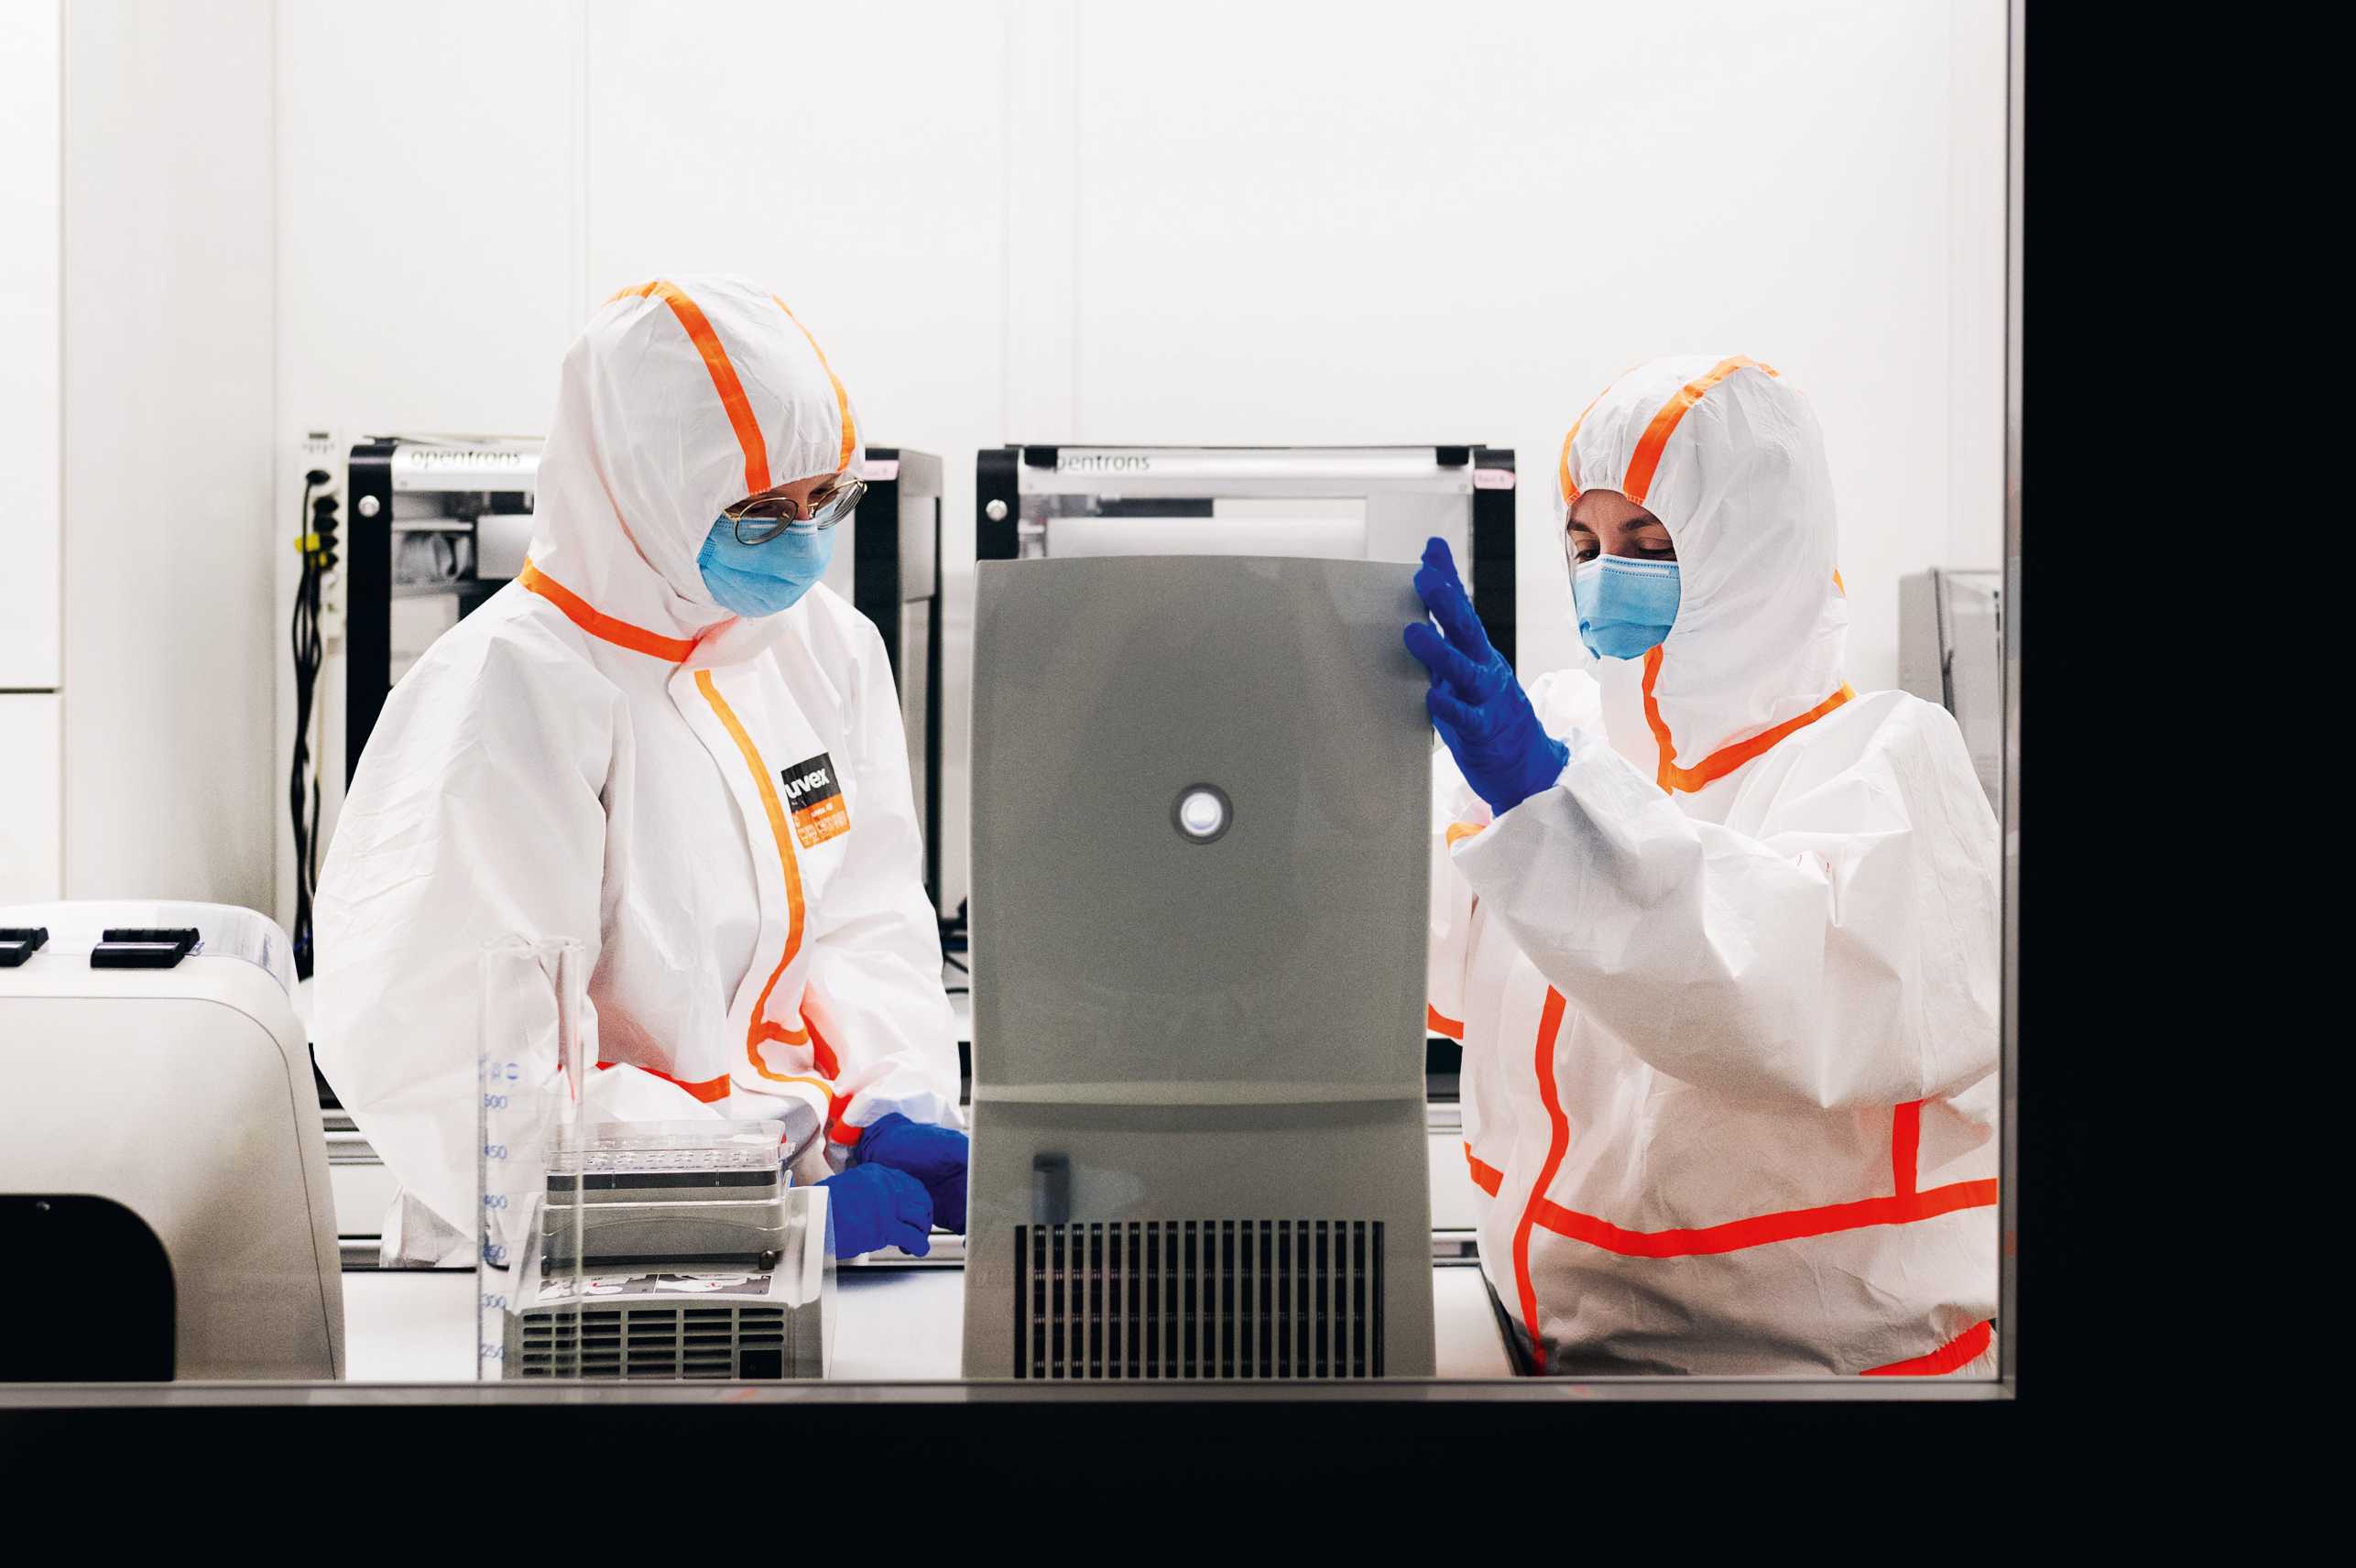 Enlarged view: Two people in protective suits are working on the samples.